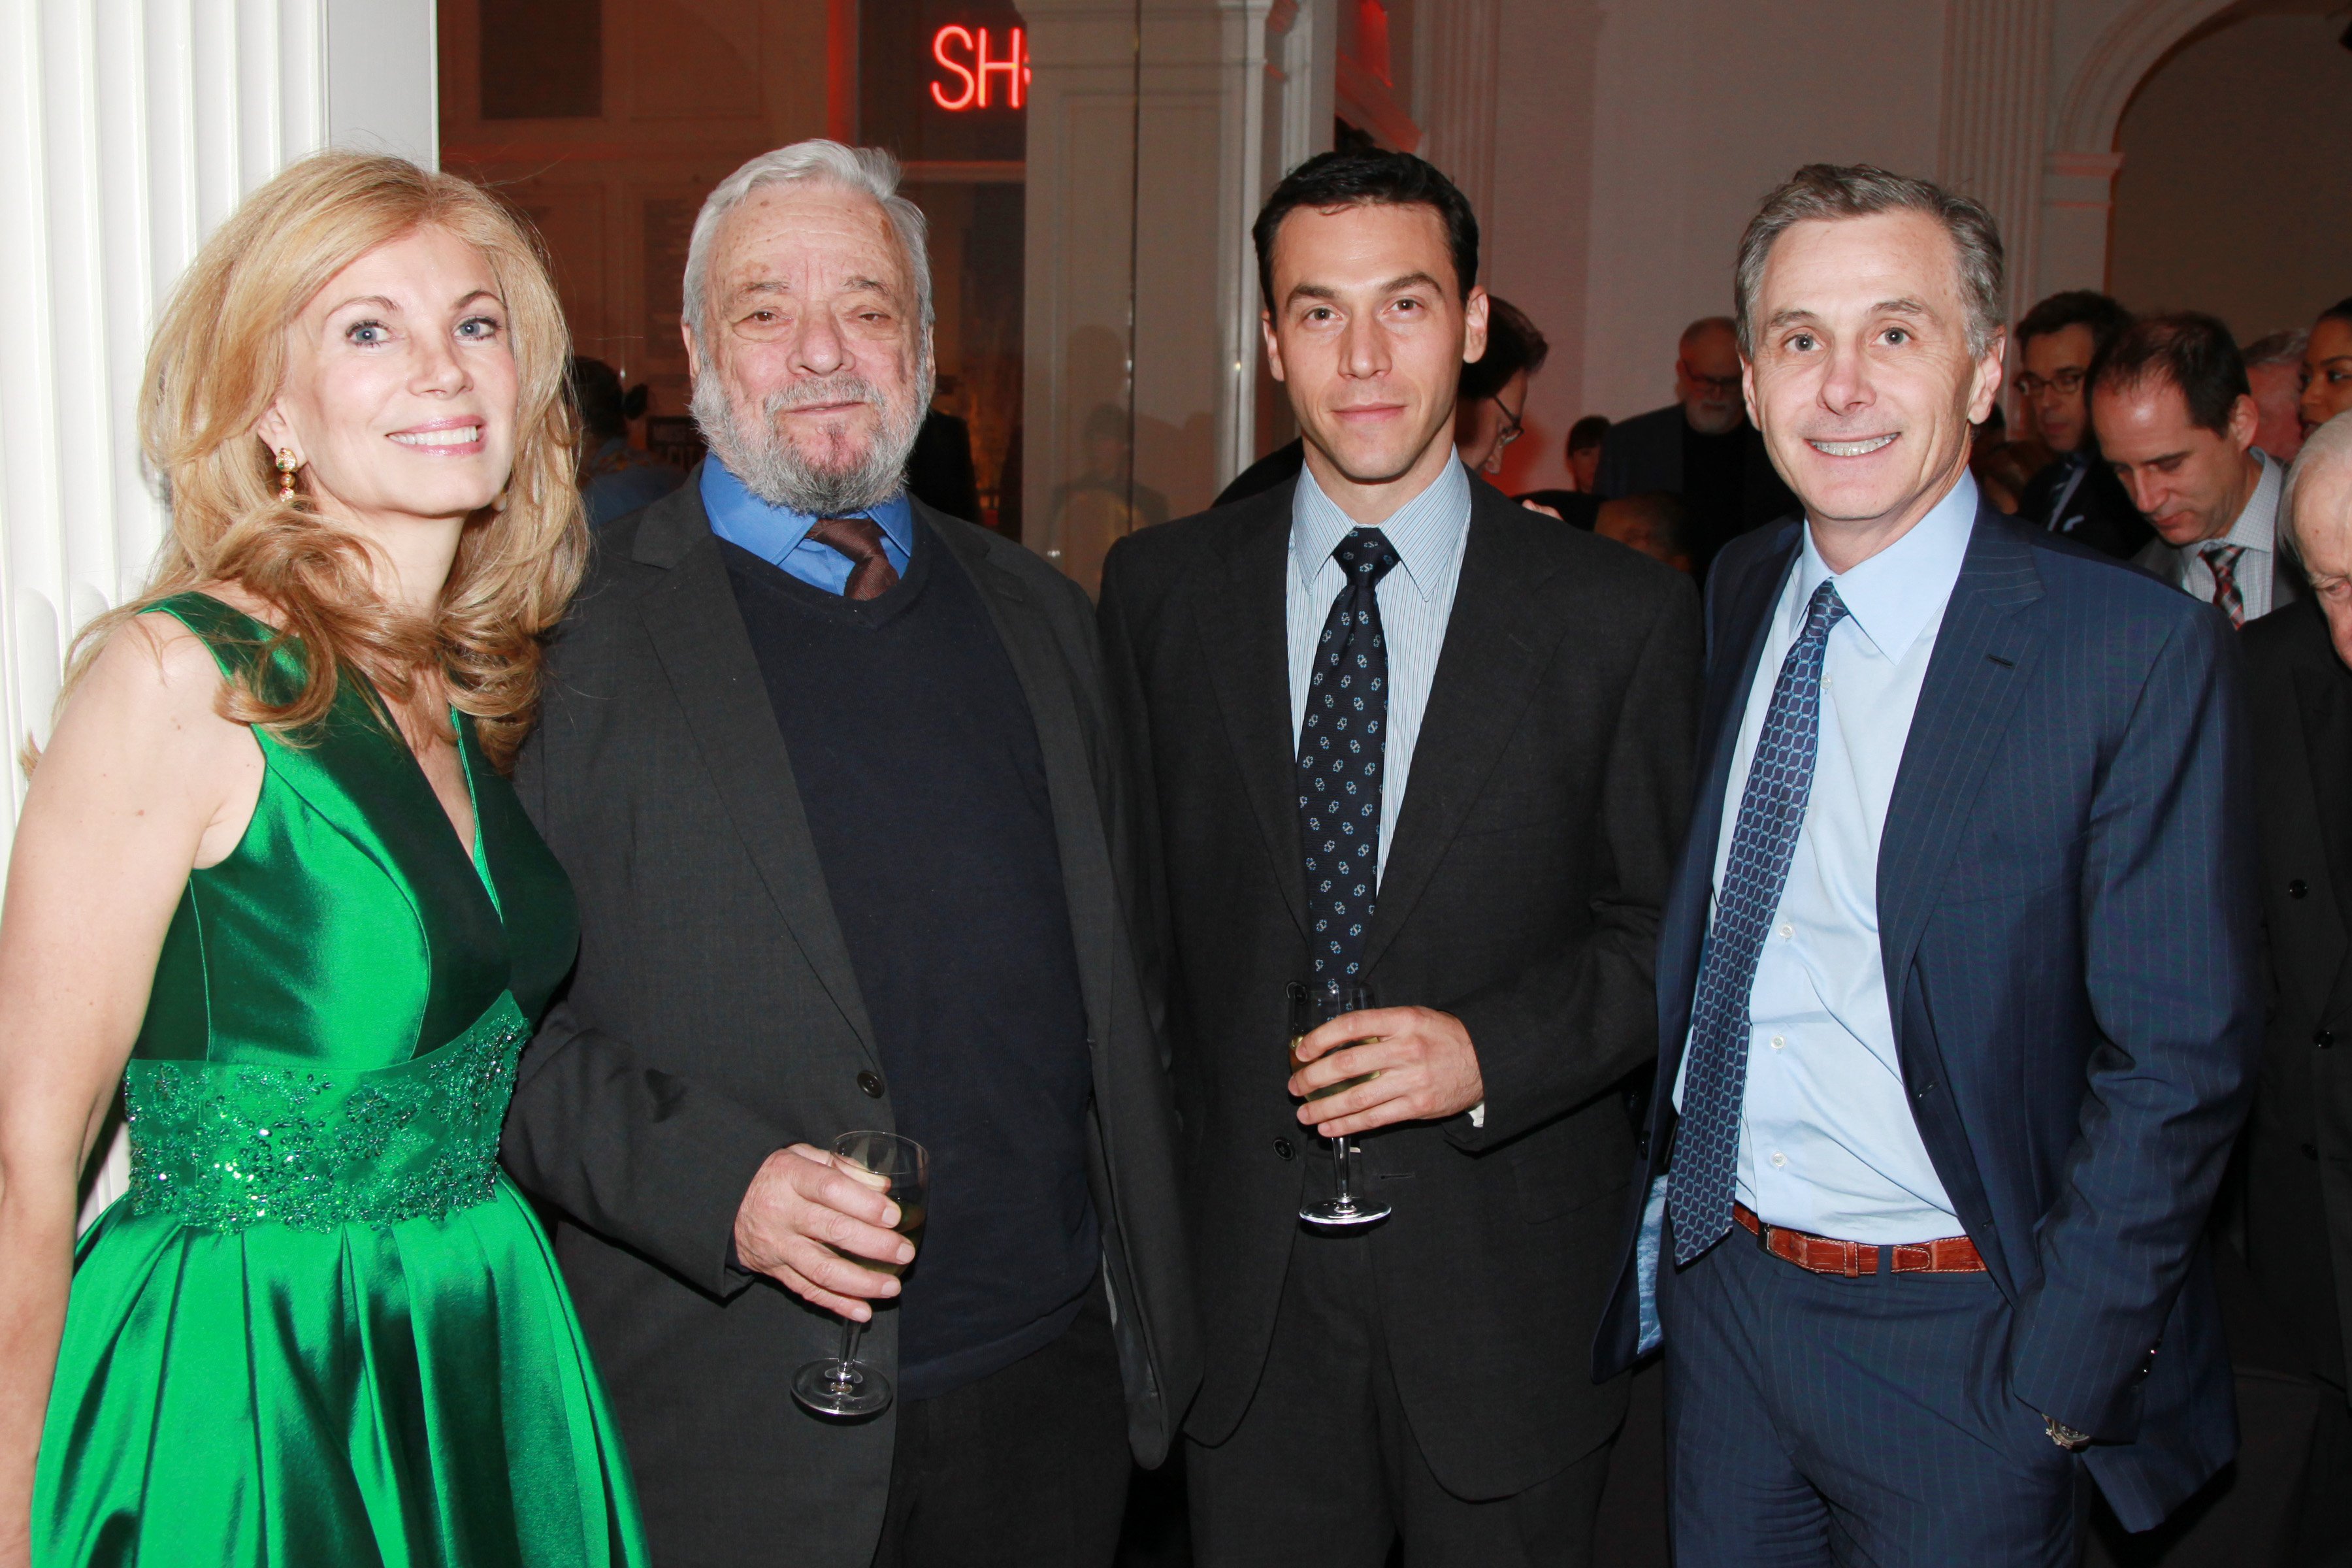 Laura Lofaro Freeman, Stephen Sondheim, Jeff Romley and James Dinan attend the Museum of the City of New York hosts CABARET! and the Presentation of the 2013 Louis Auchincloss Prize to Stephen Sondheim at the Museum of the City of New York on November 19, 2013, in New York City. | Source: Getty Images